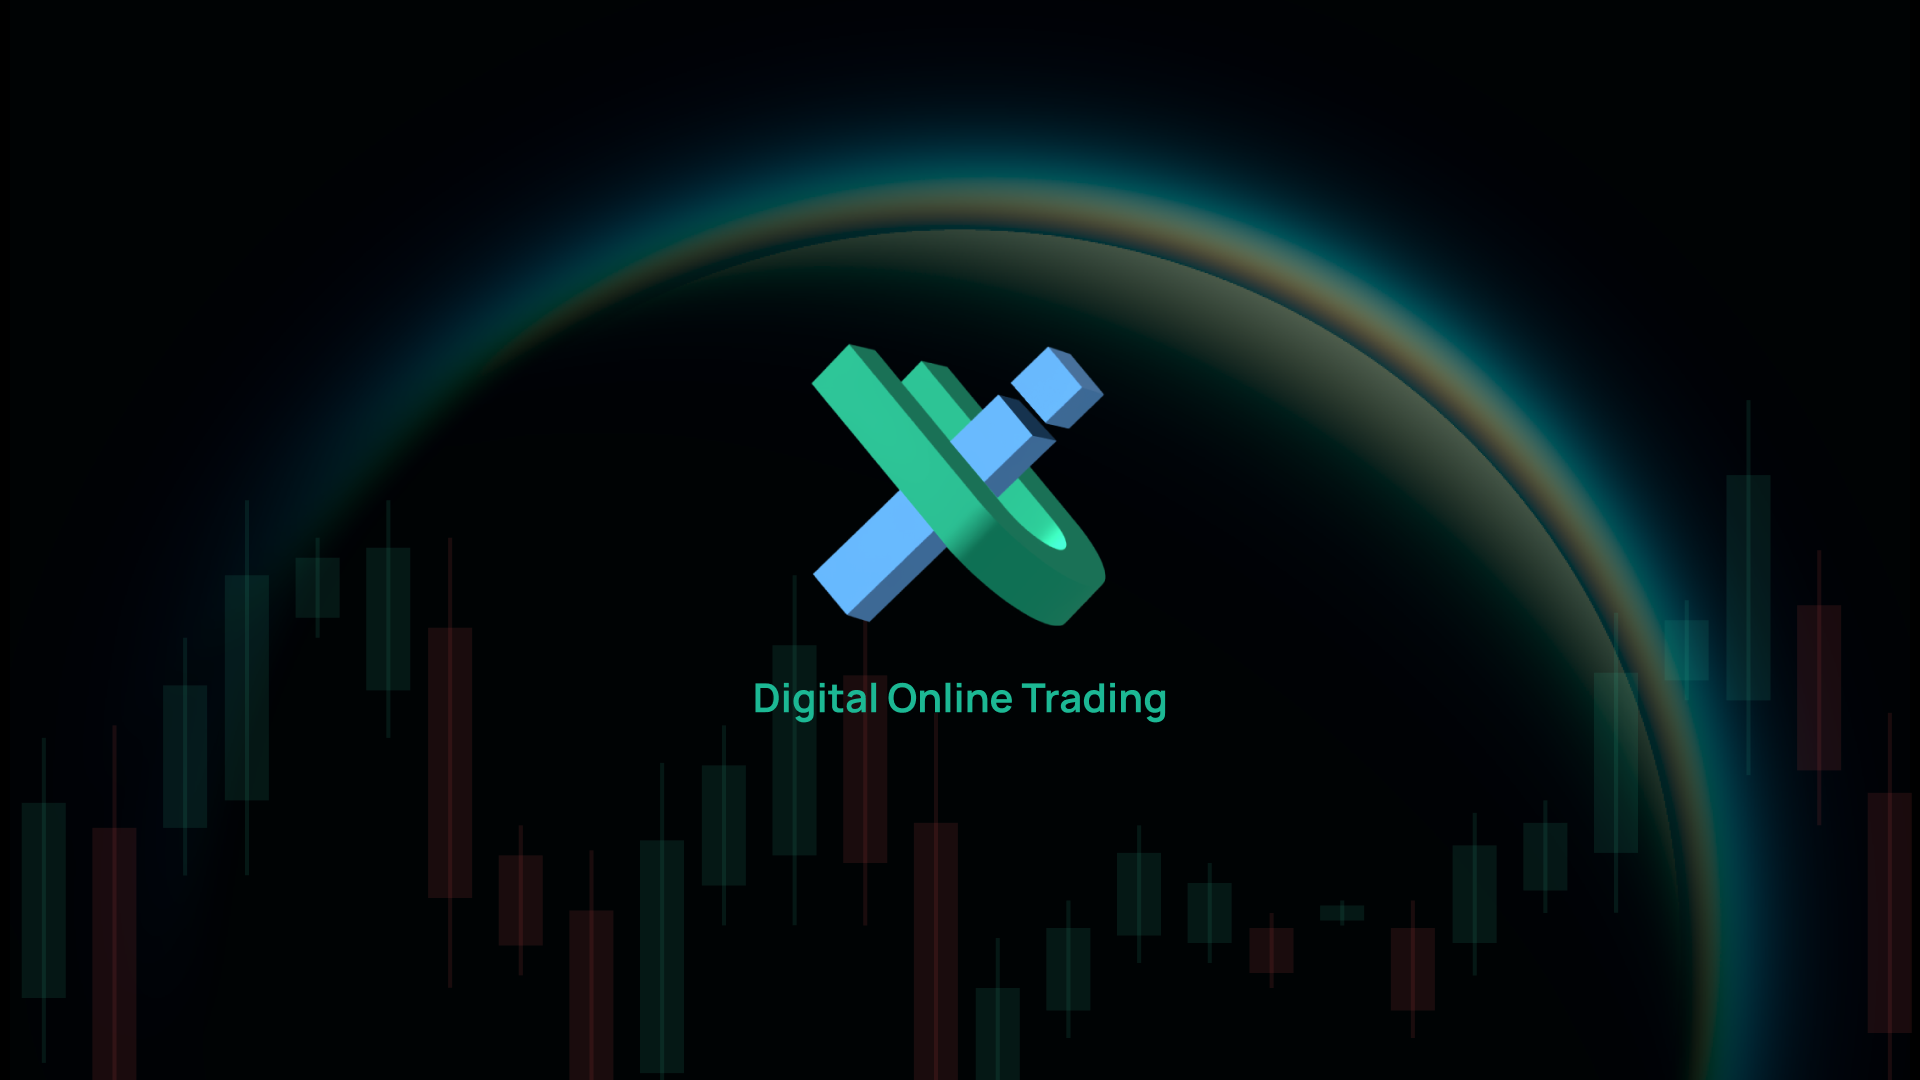 Ready go to ... https://www.iuxmarkets.com/th/referral?code=AcGRDl4V [ IUX | Your Trusted Online Trading Platform]